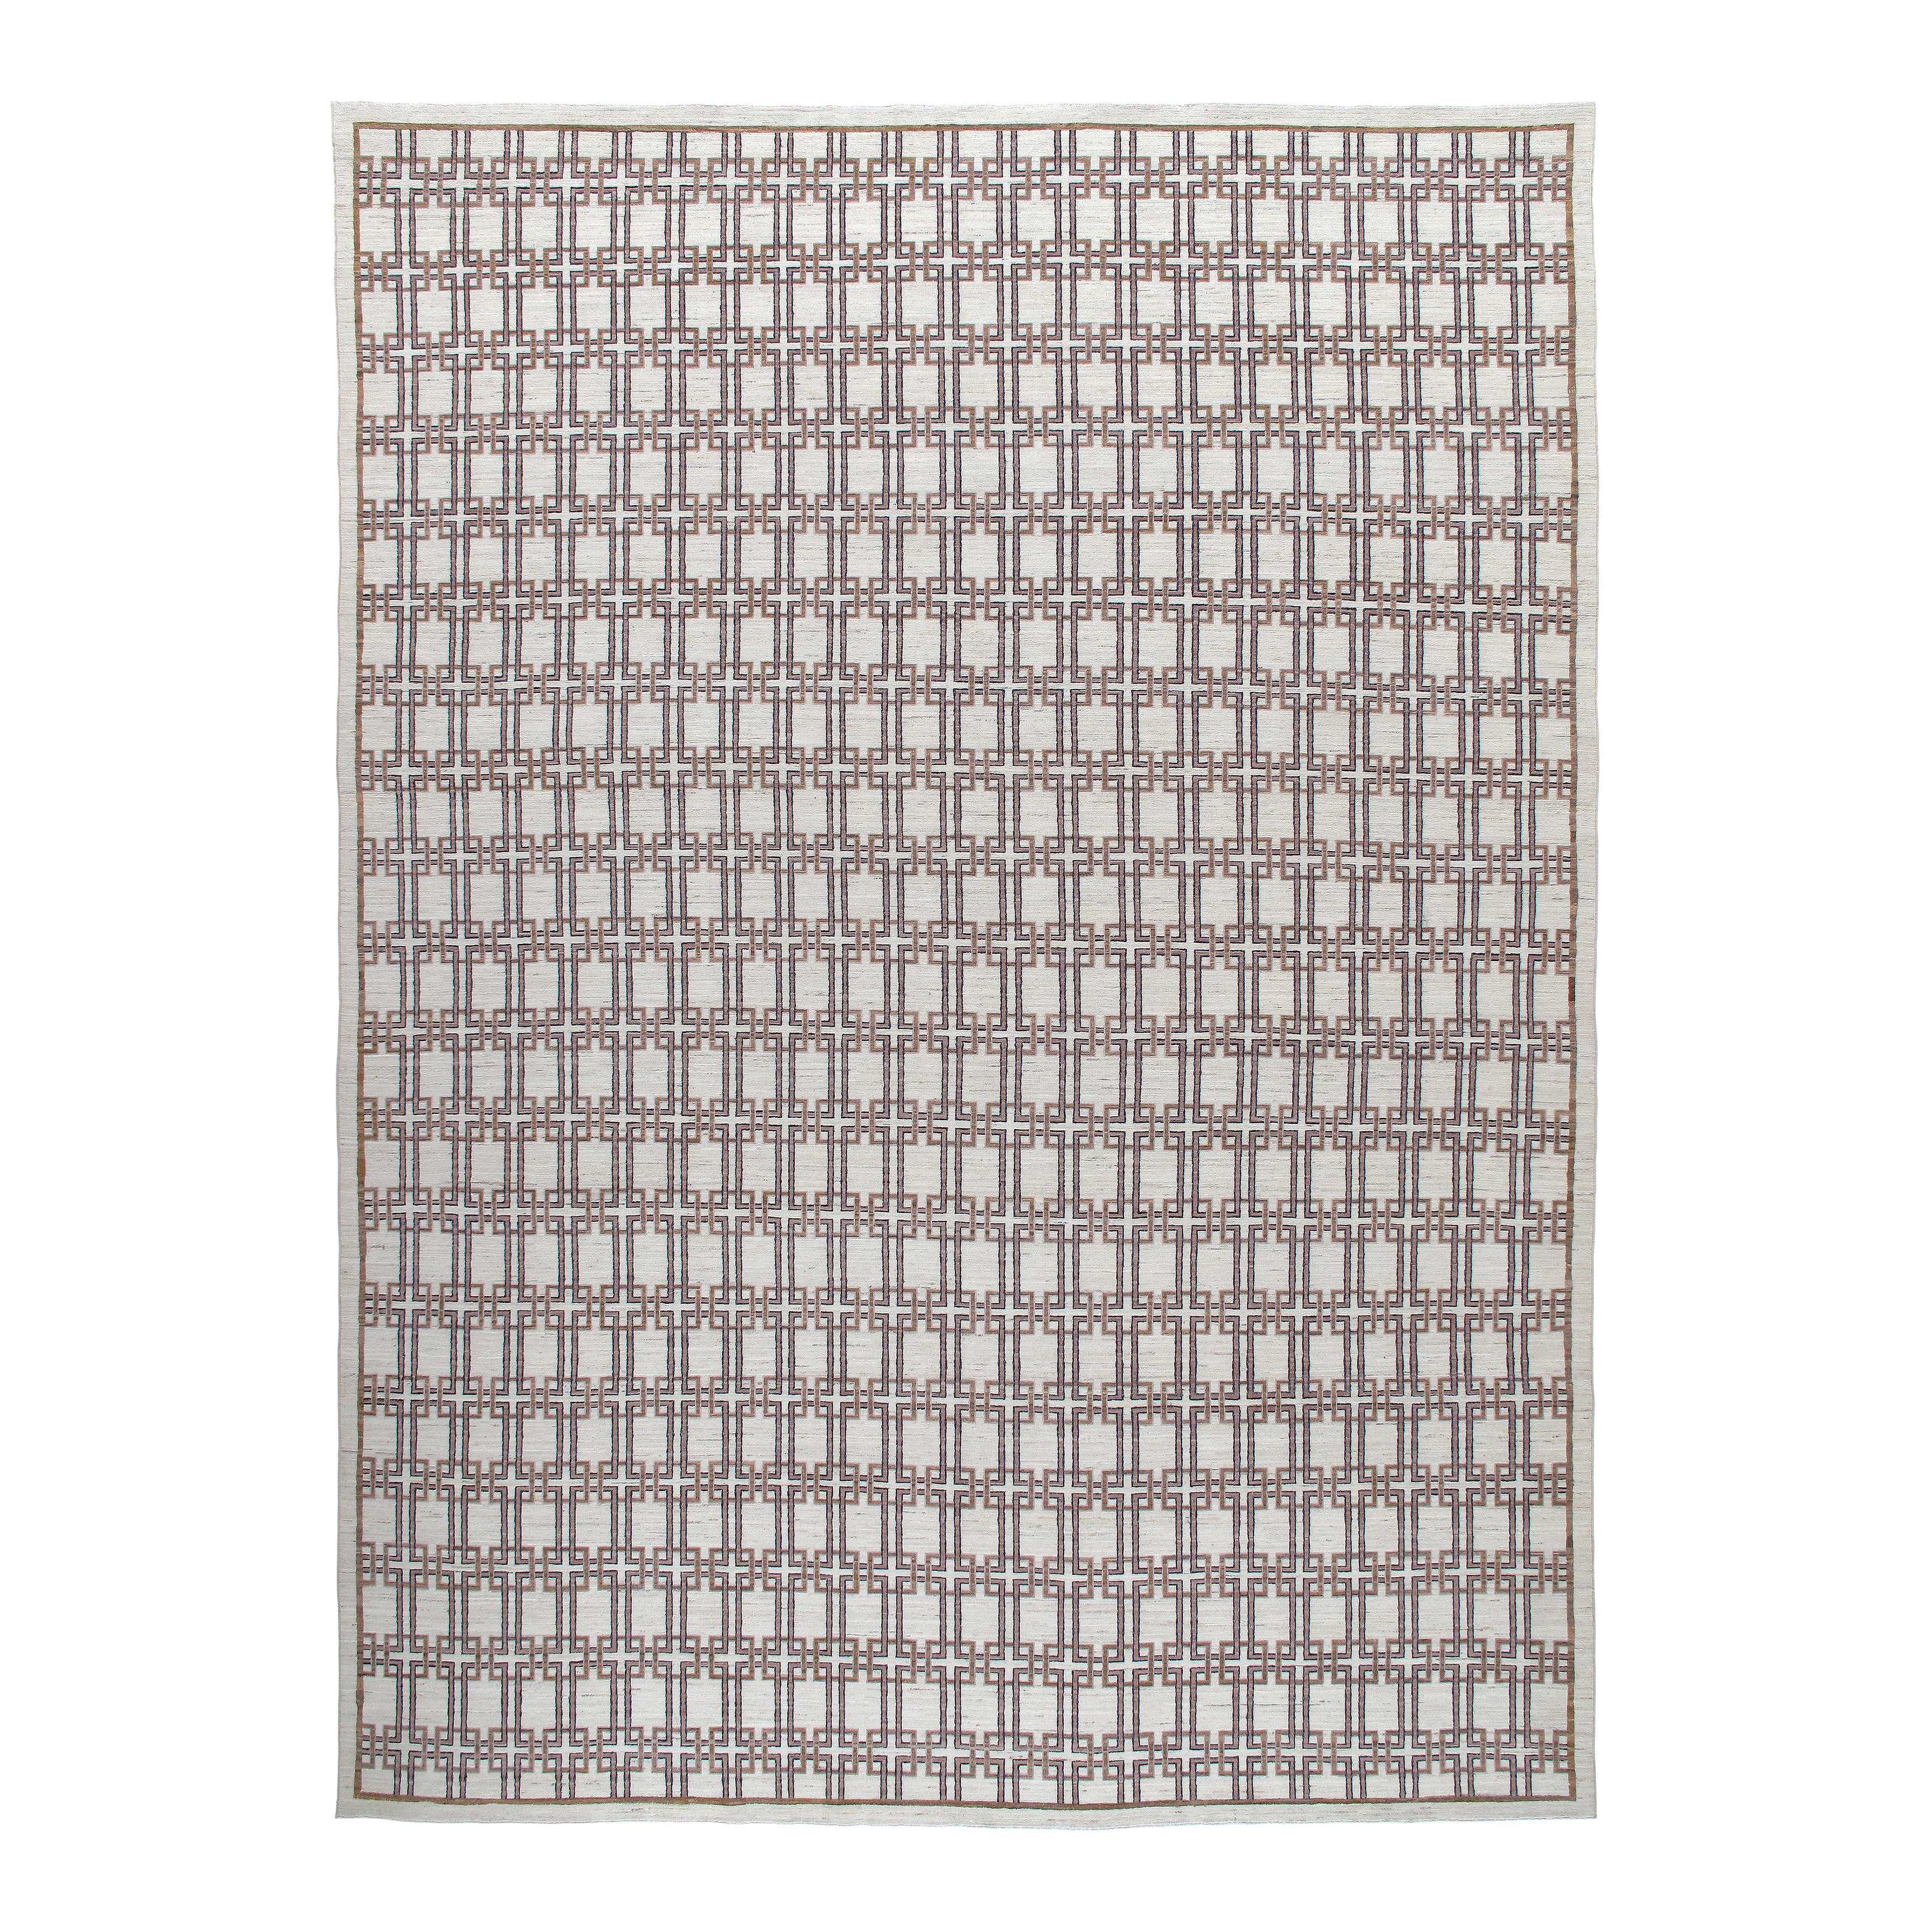 Our Geometric rug is handknotted from the finest hand-carded, hand-spun, naturally dyed wool.